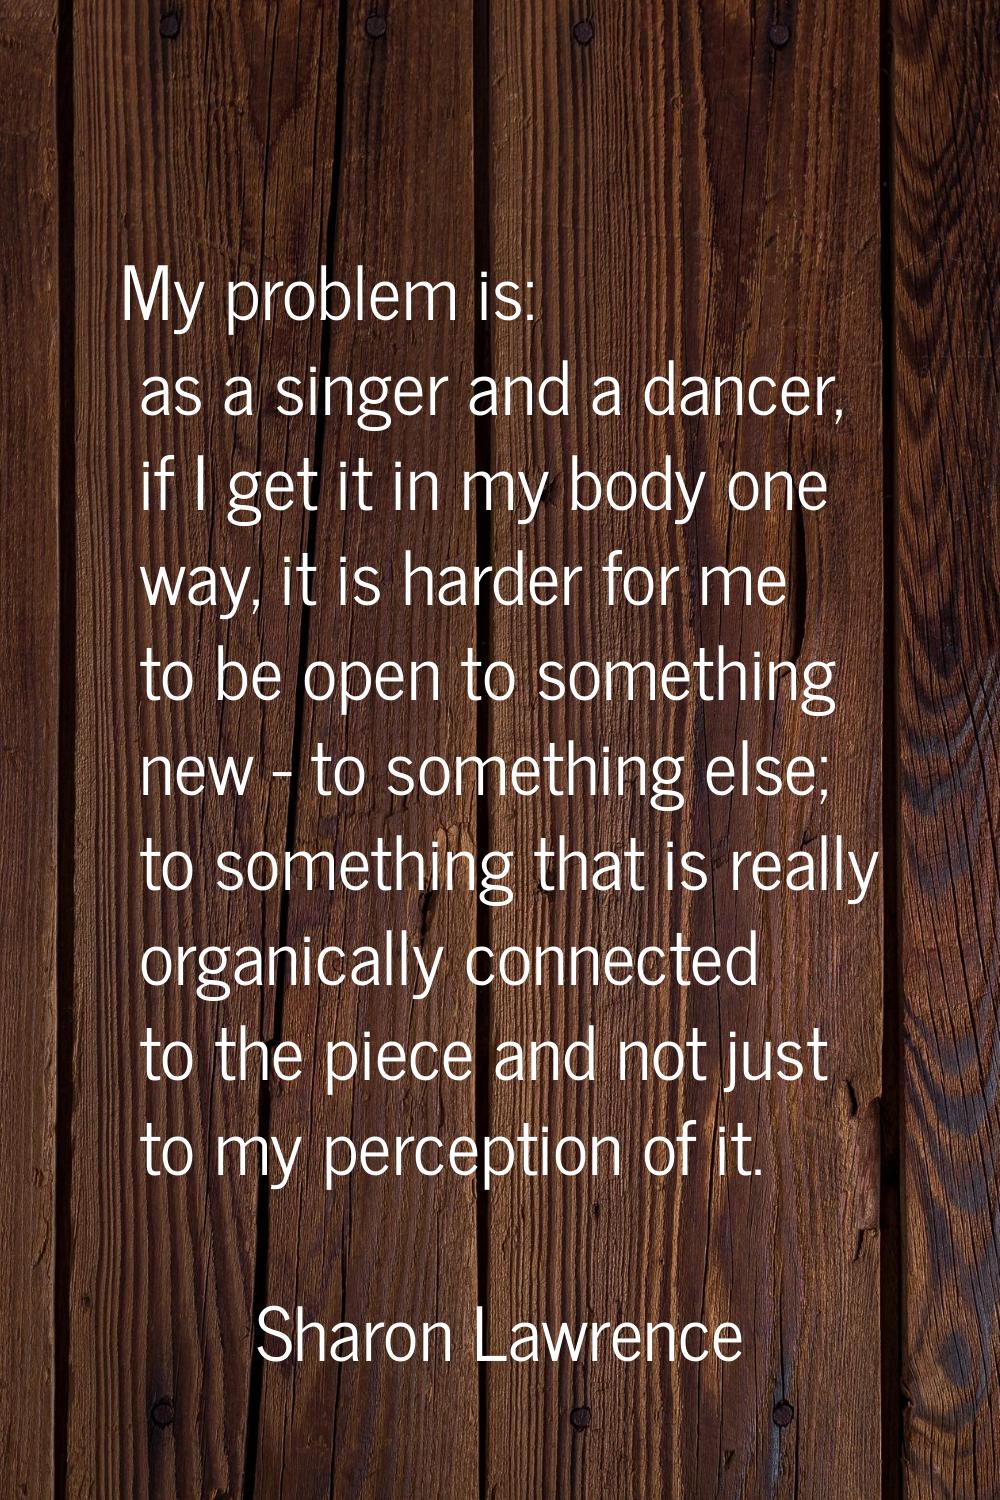 My problem is: as a singer and a dancer, if I get it in my body one way, it is harder for me to be 